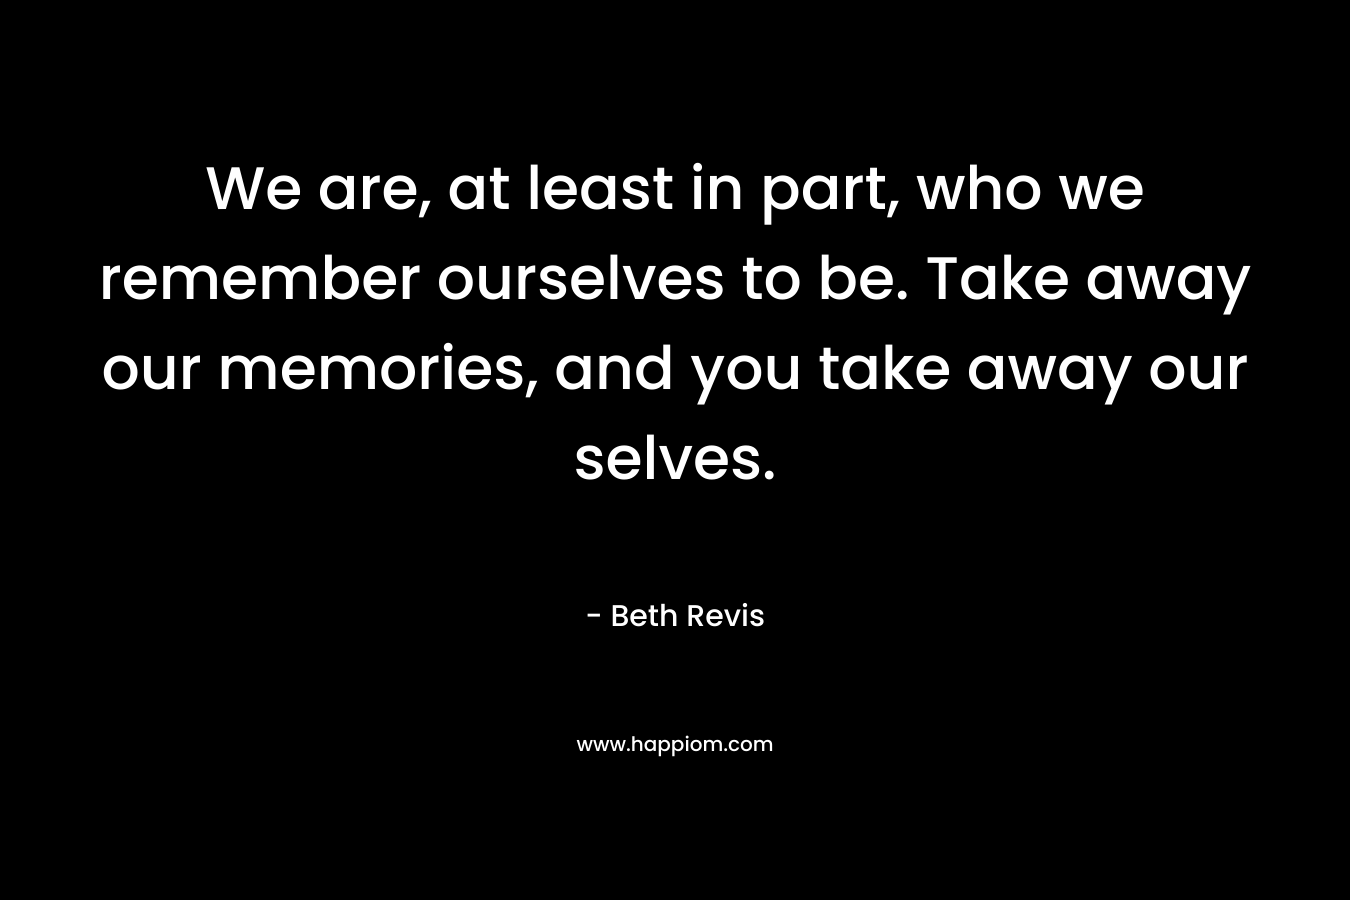 We are, at least in part, who we remember ourselves to be. Take away our memories, and you take away our selves. – Beth Revis